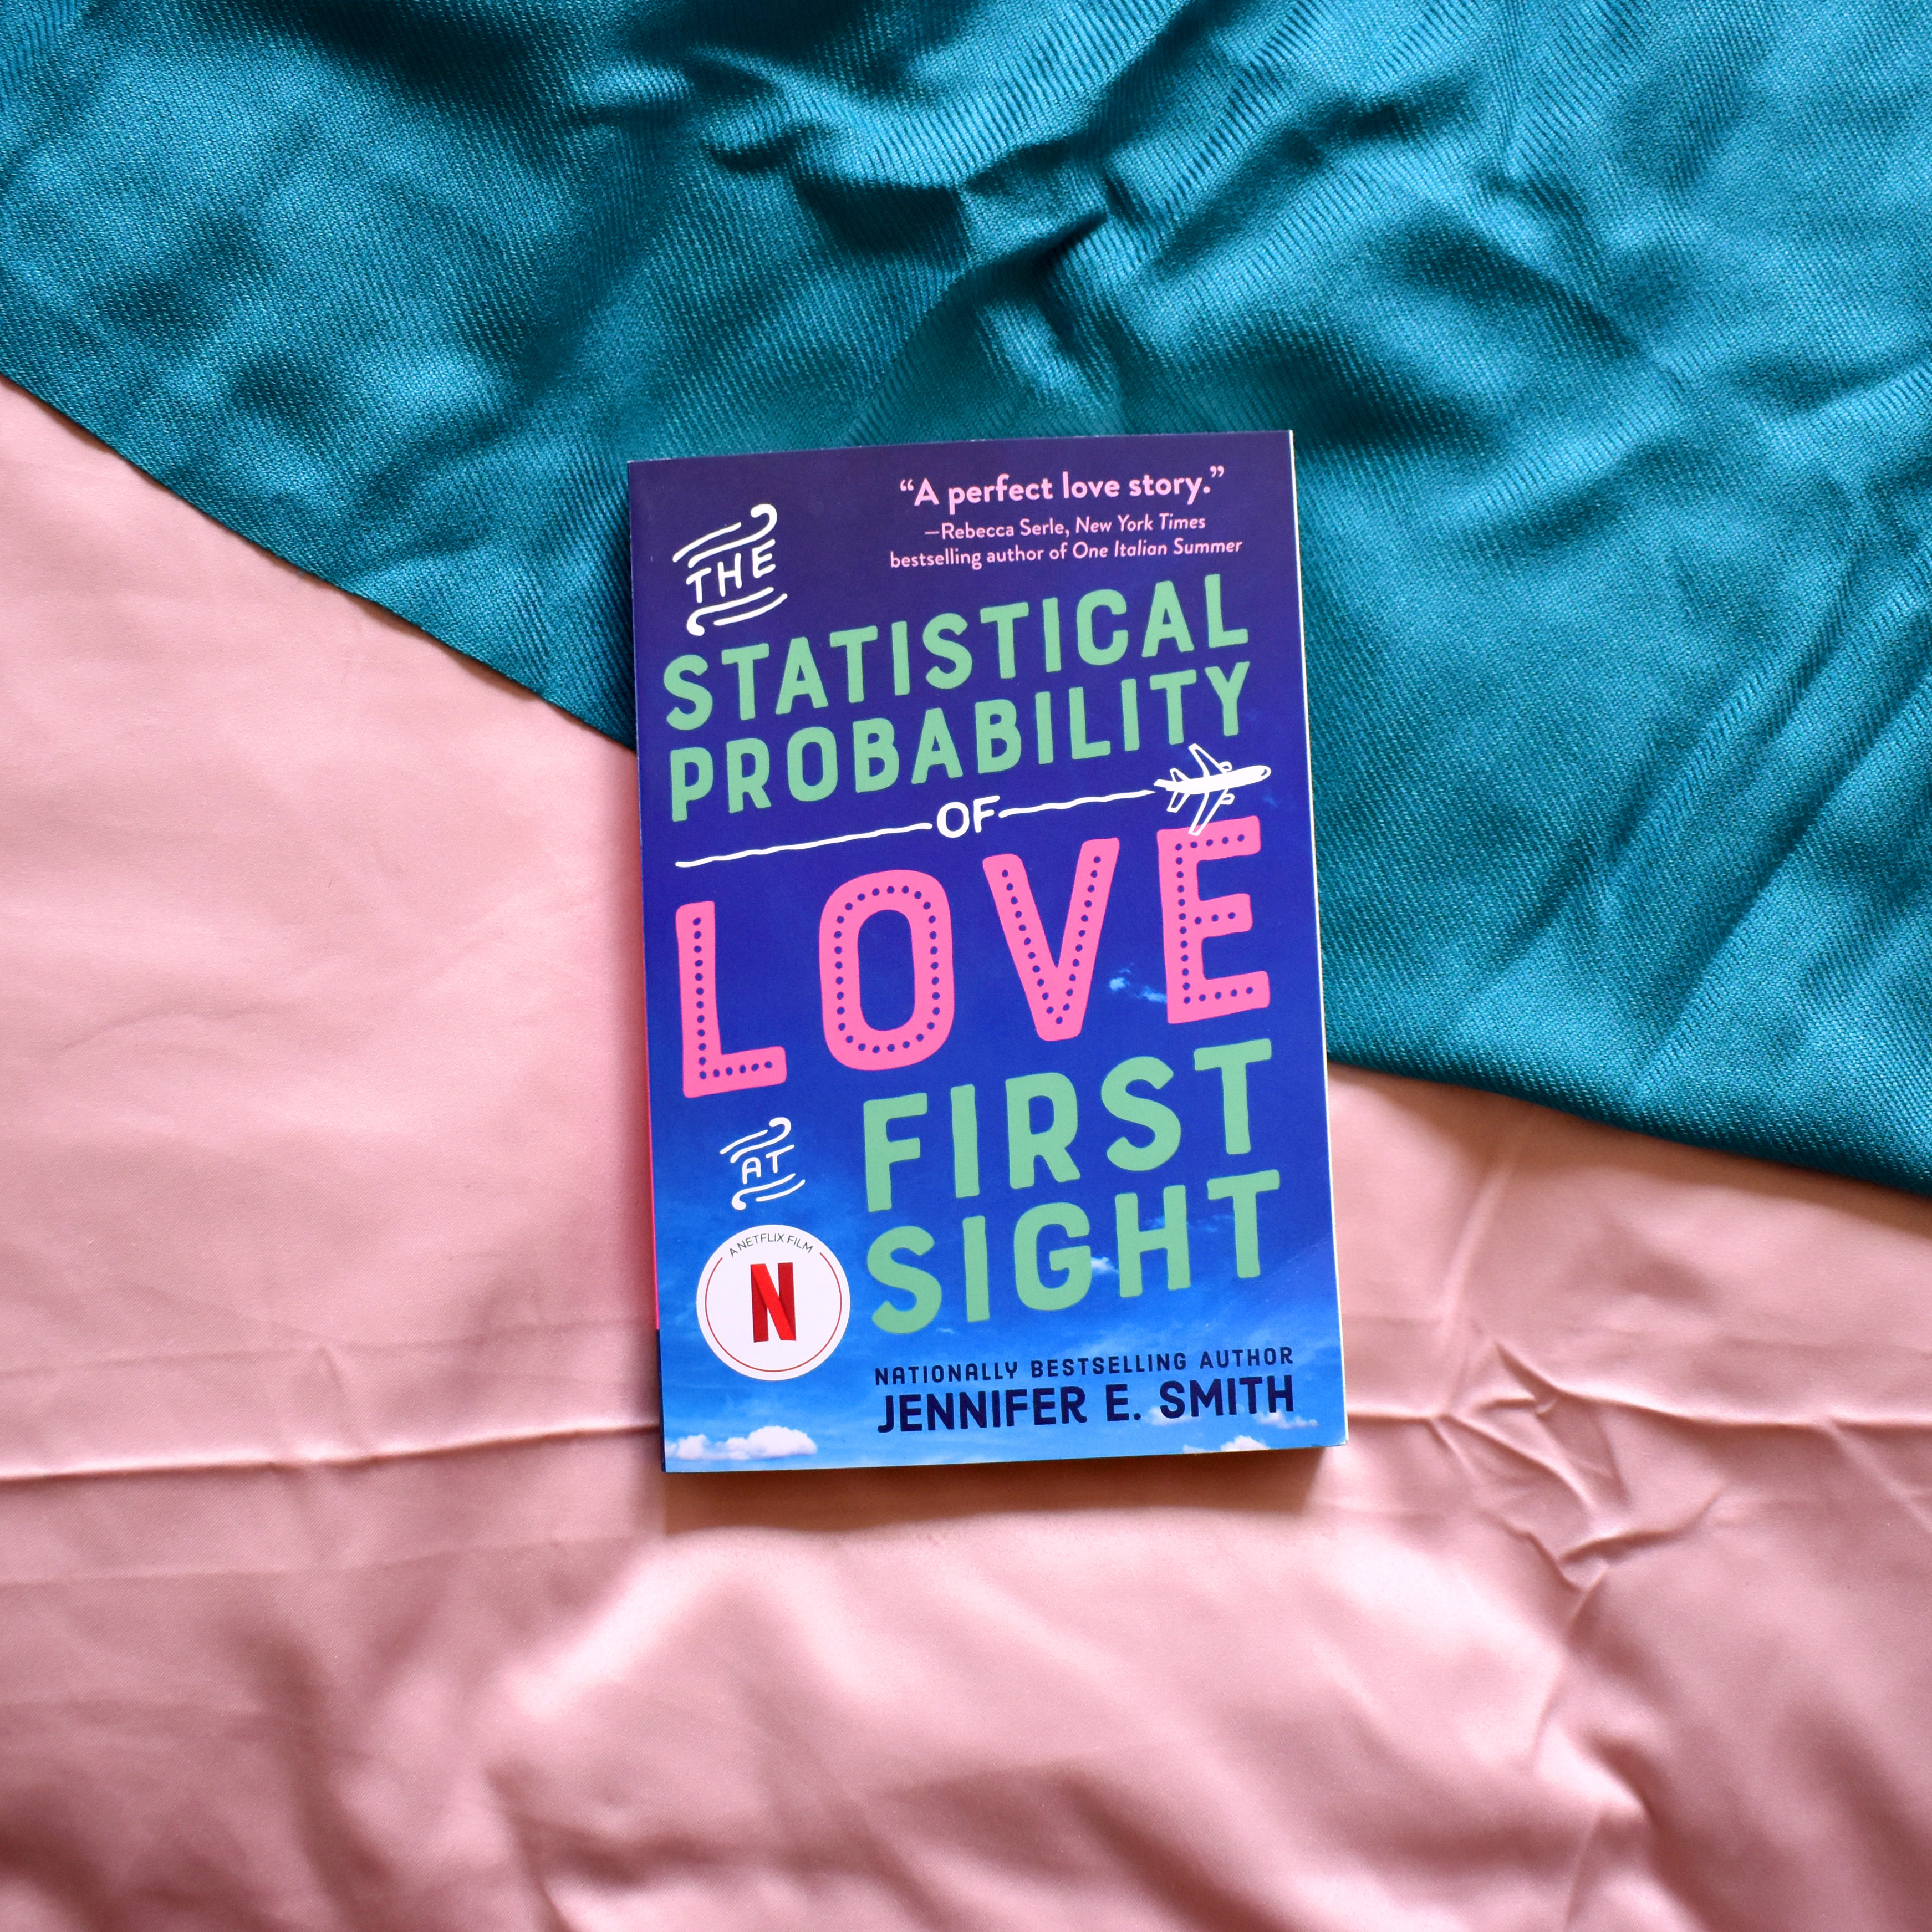 Image of the book "The Statistical Probability of Love at First Sight" by Jennifer E. Smith